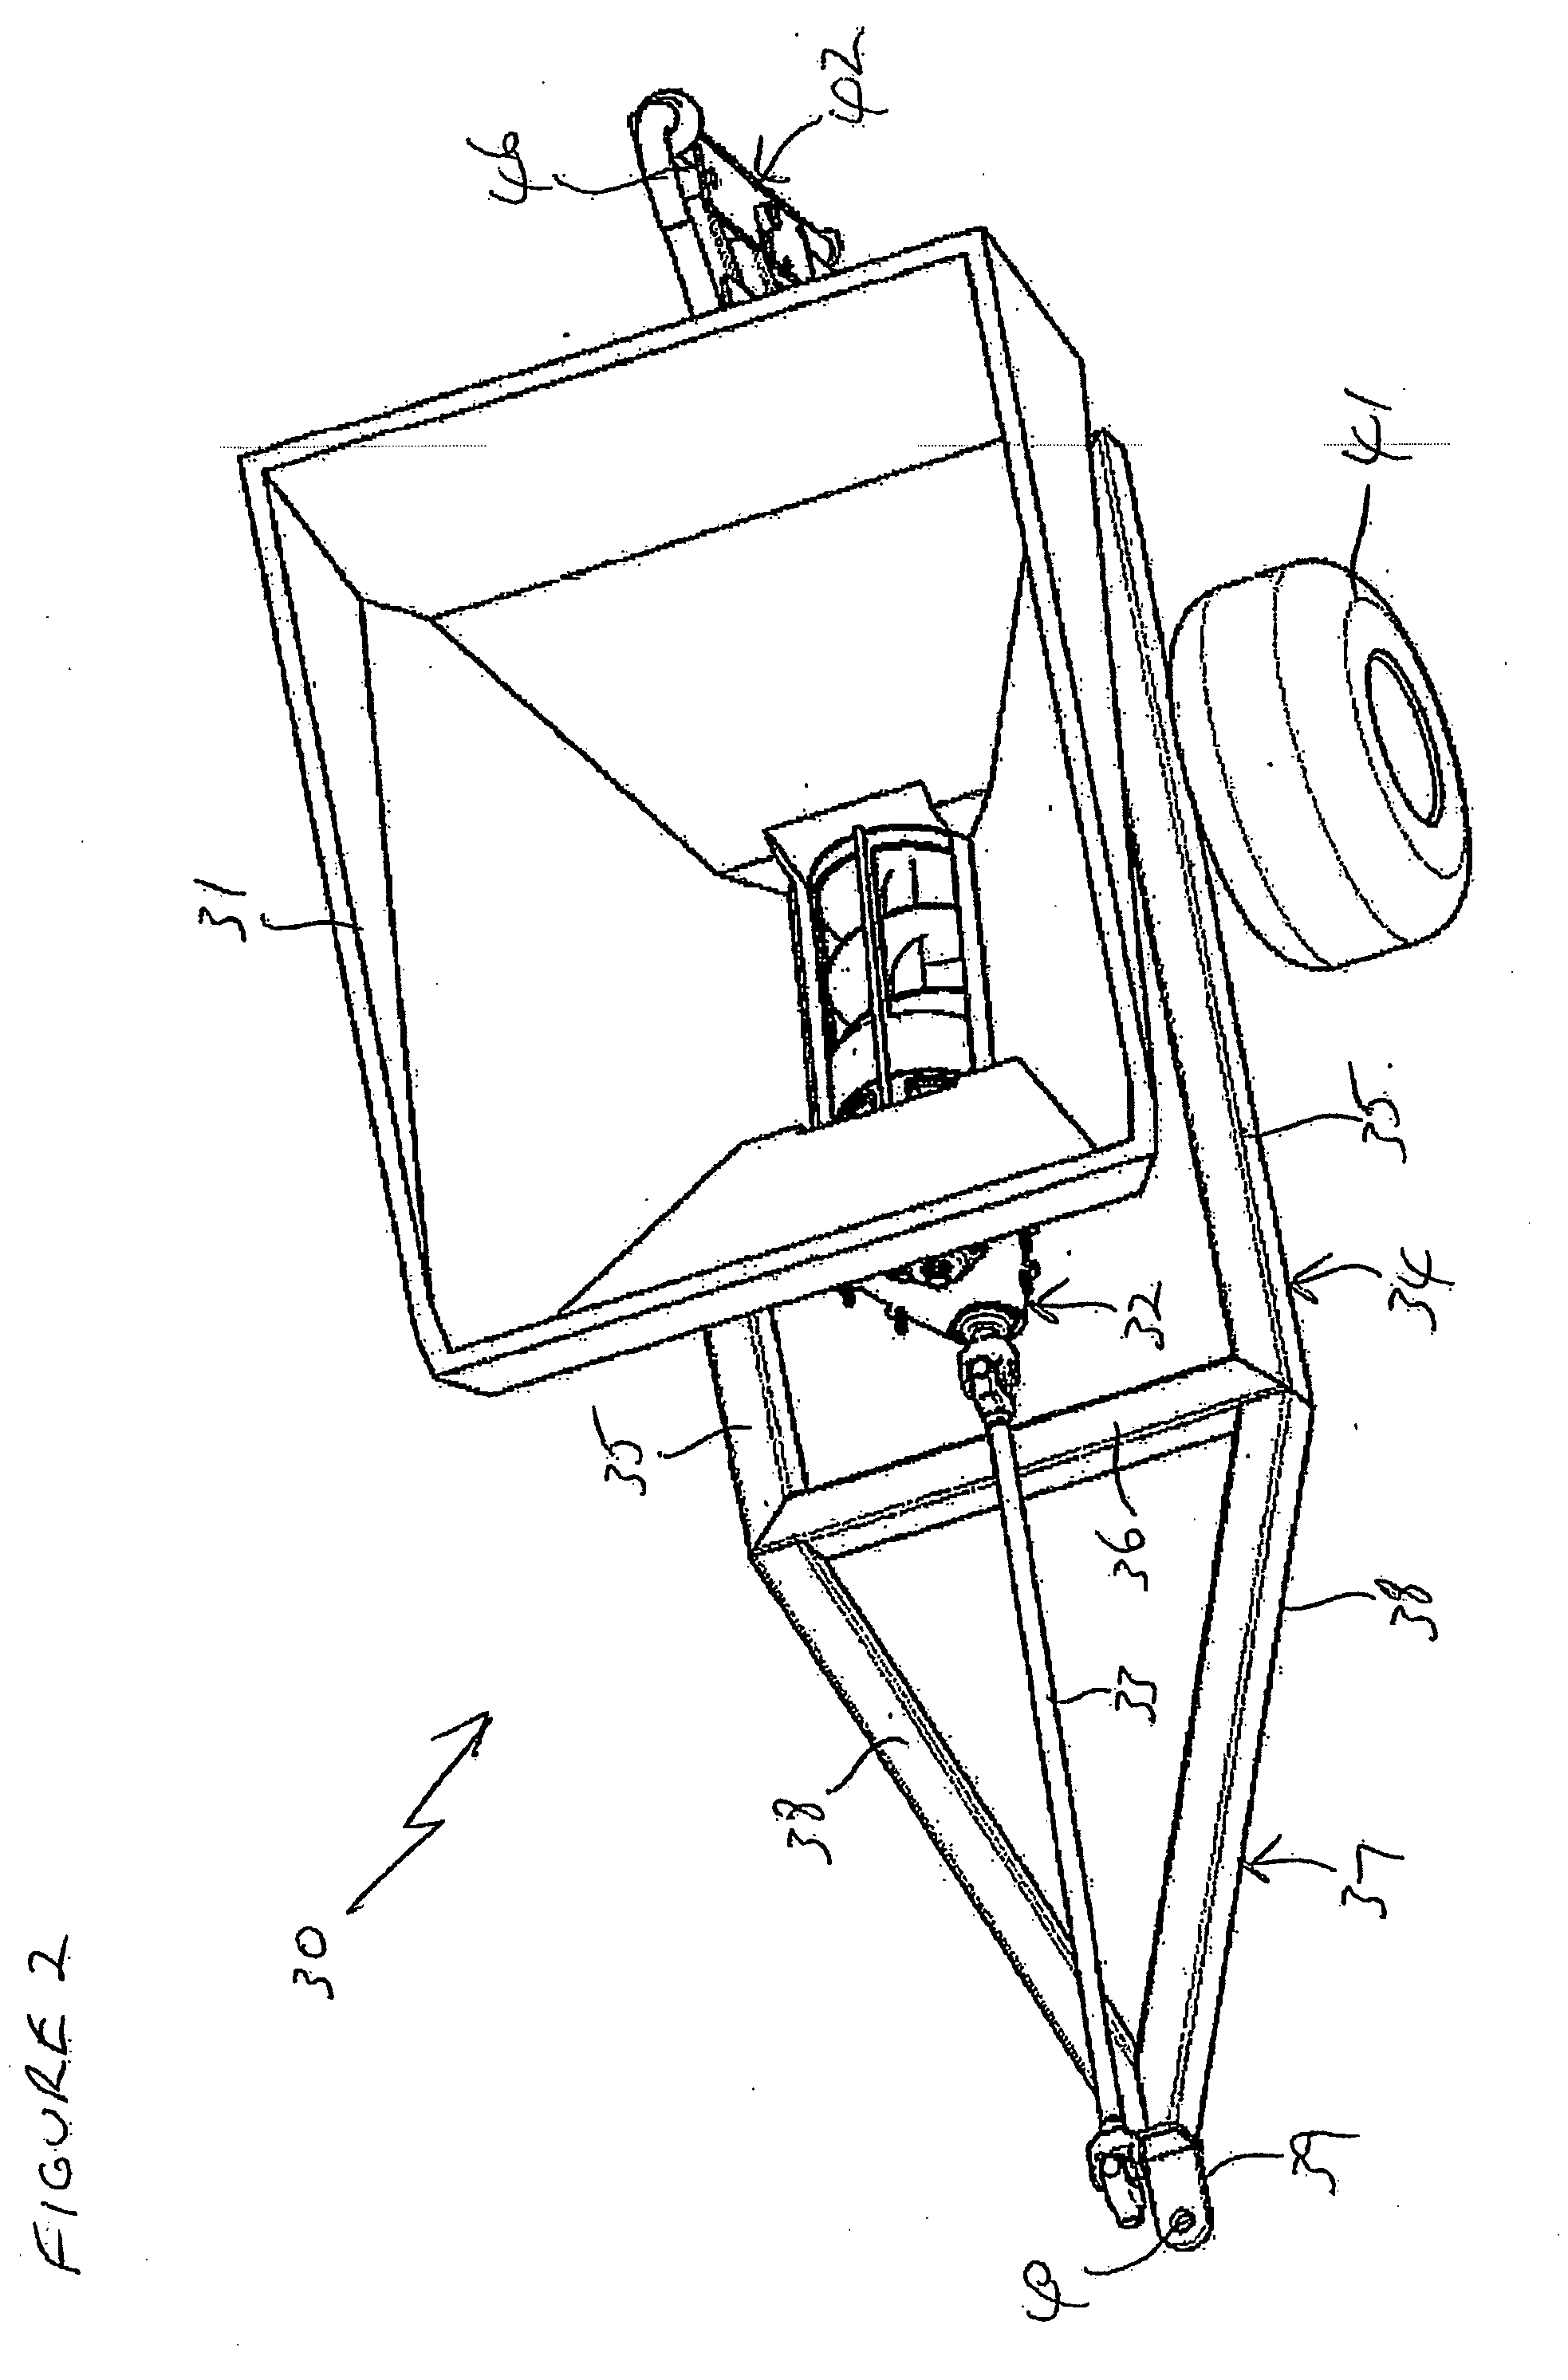 Method and Apparatus for Applying Matter to a Field